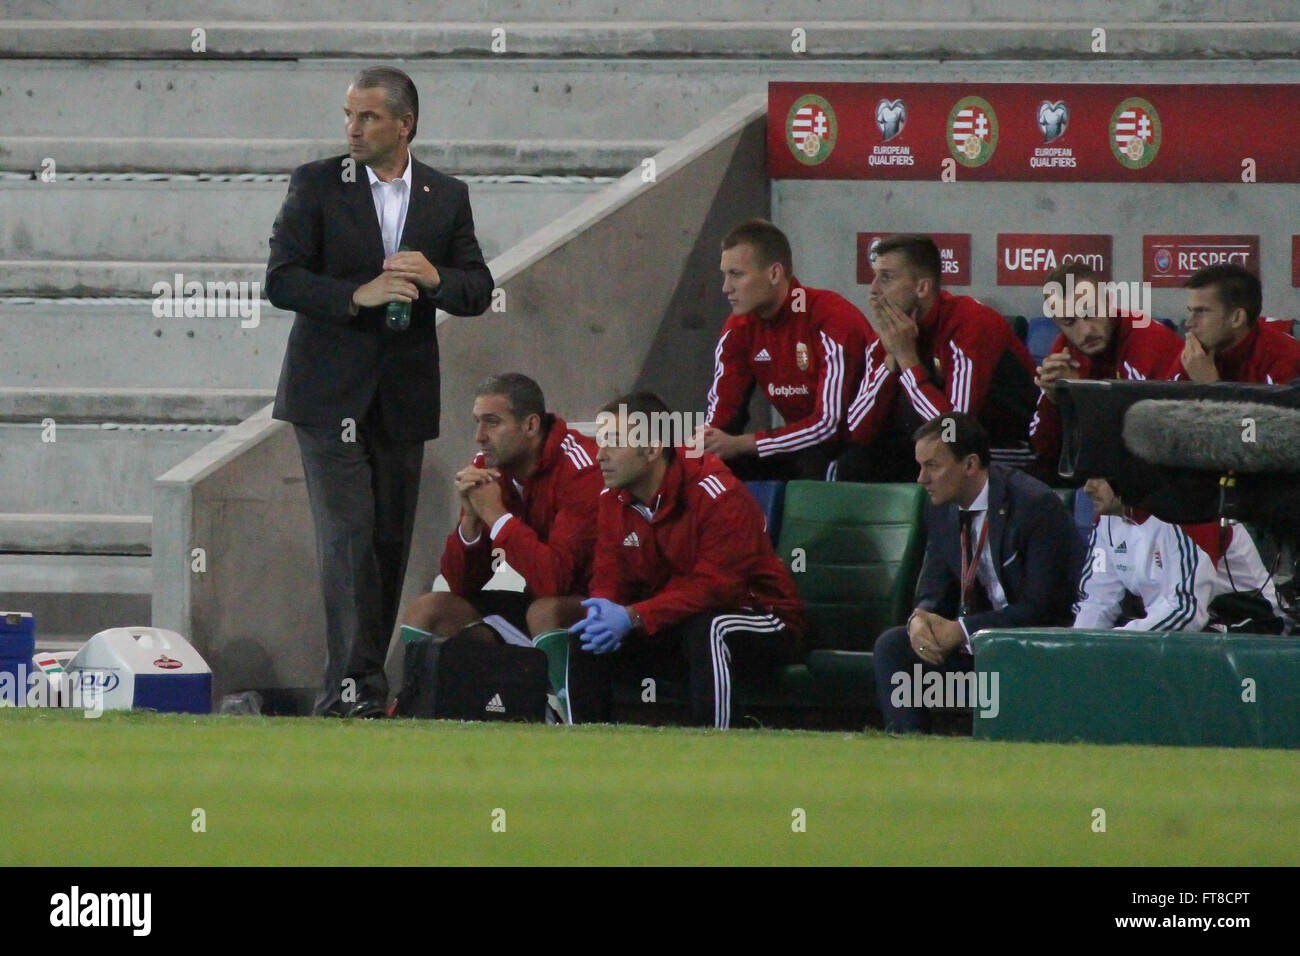 07 Sept 2015 - Euro 2016 Qualifier - Group F - Northern Ireland 1 Hungary 1. Hungary's manager Bernd Storck watches the action from the technical area. Stock Photo